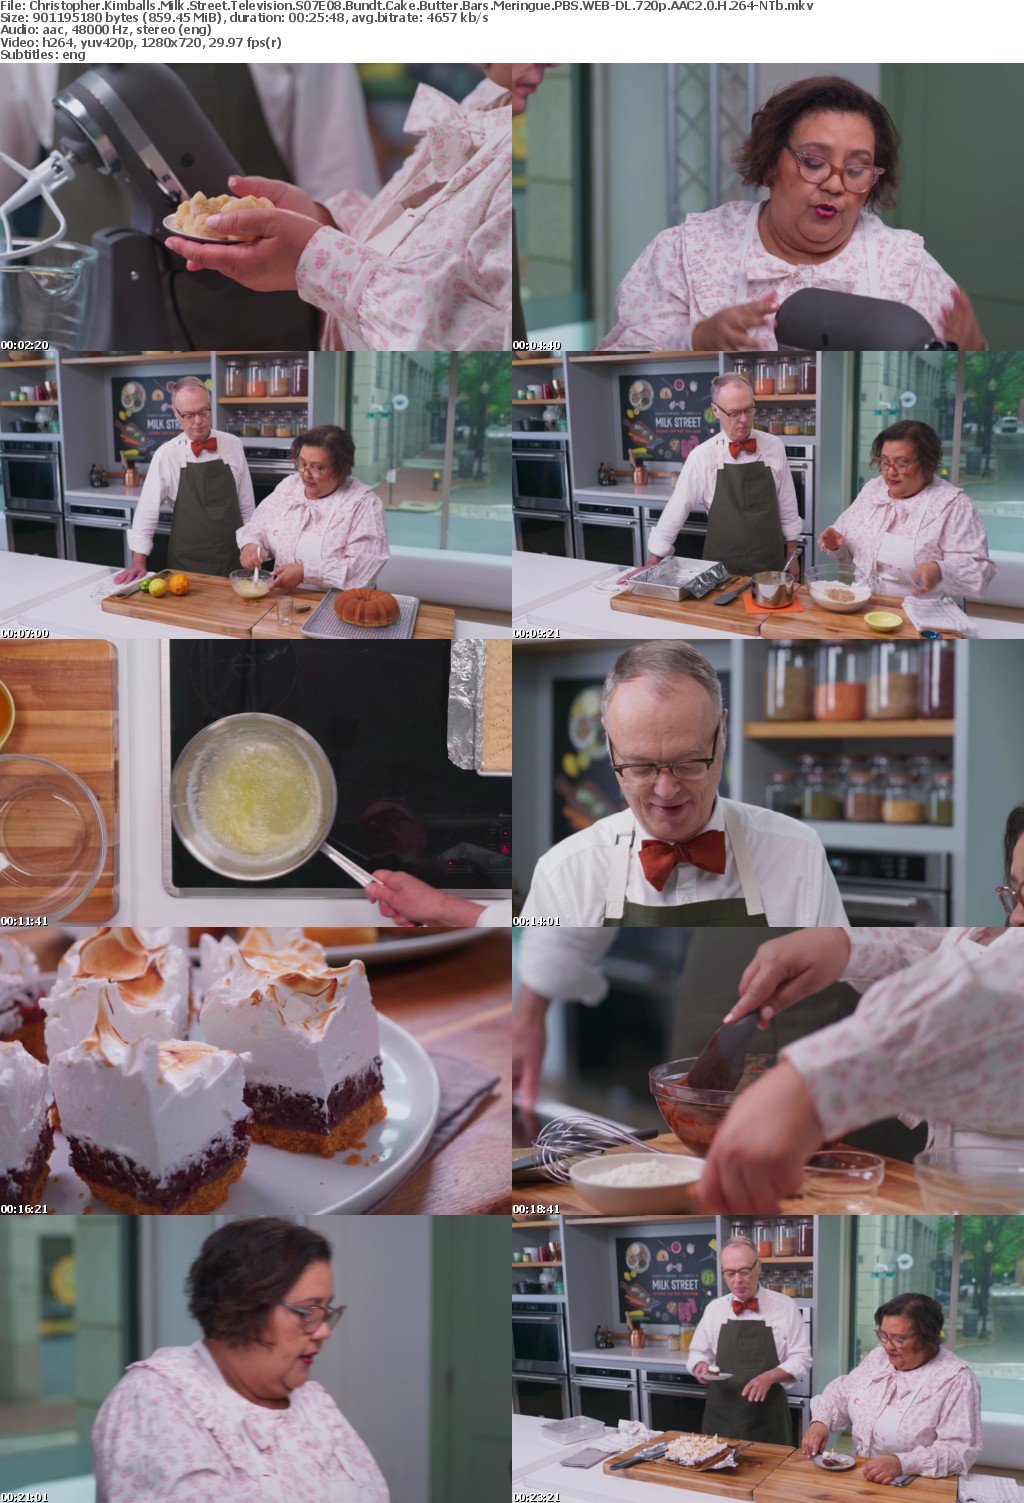 Christopher Kimballs Milk Street Television S07E08 Bundt Cake Butter Bars Meringue PBS WEB-DL 720p AAC2 0 H 264-NTb